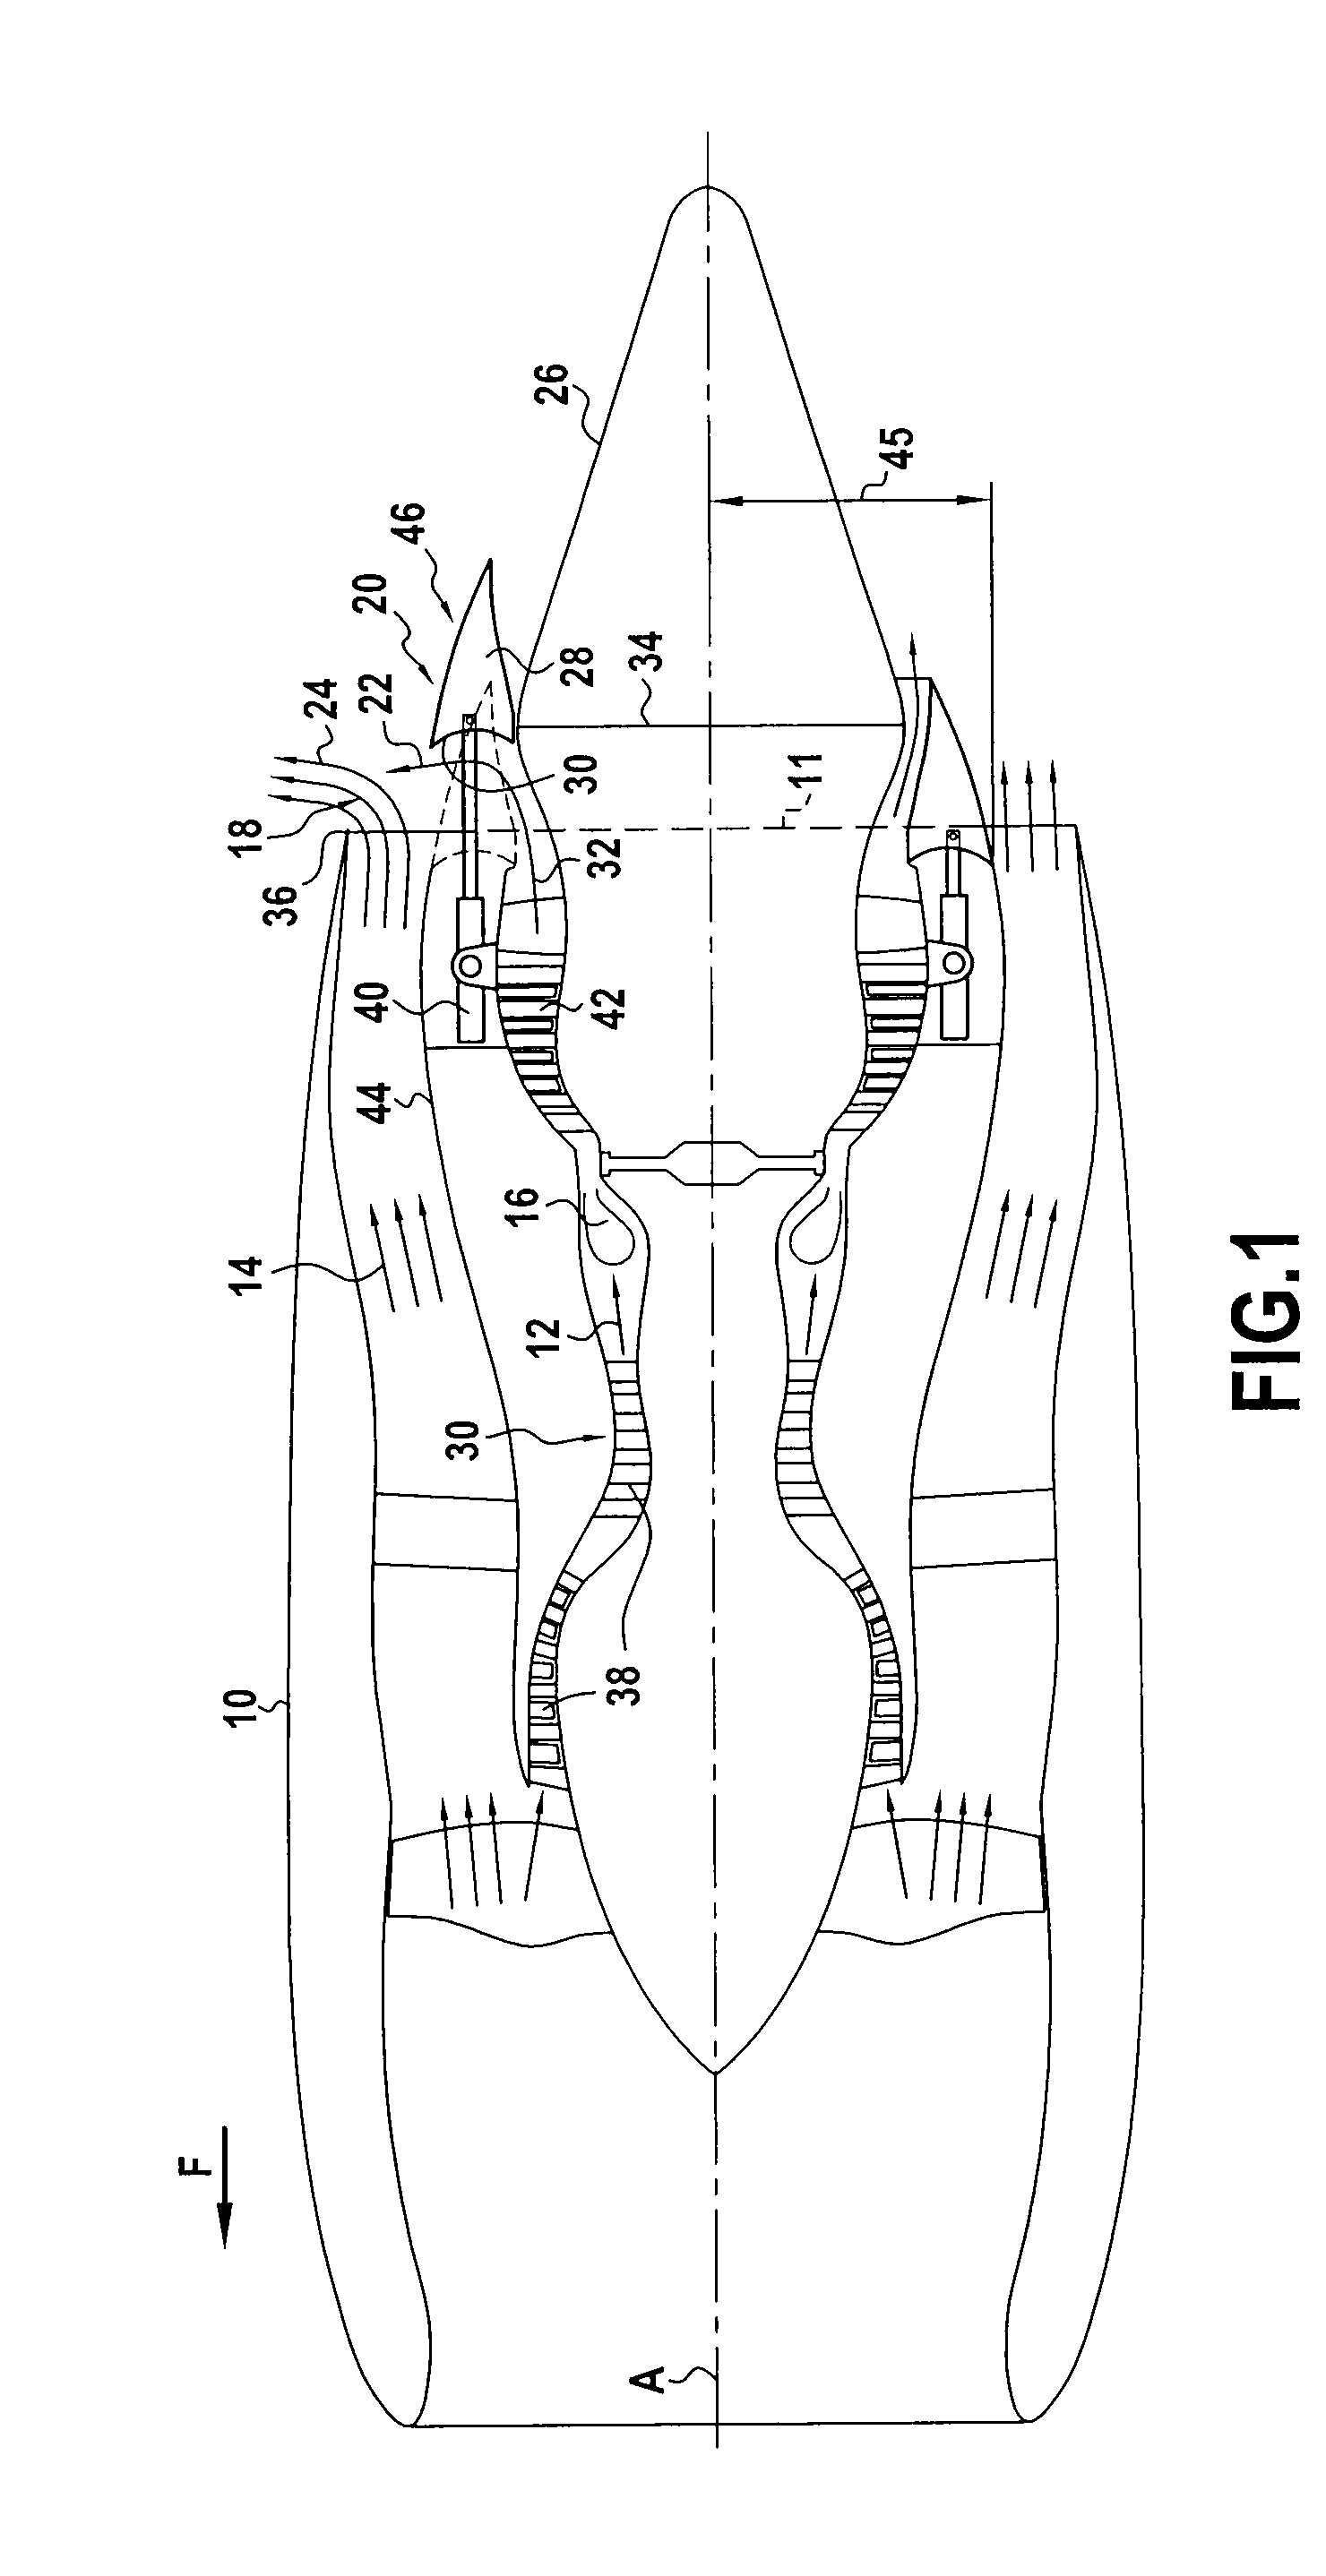 By-pass turbojet including a thrust reverser